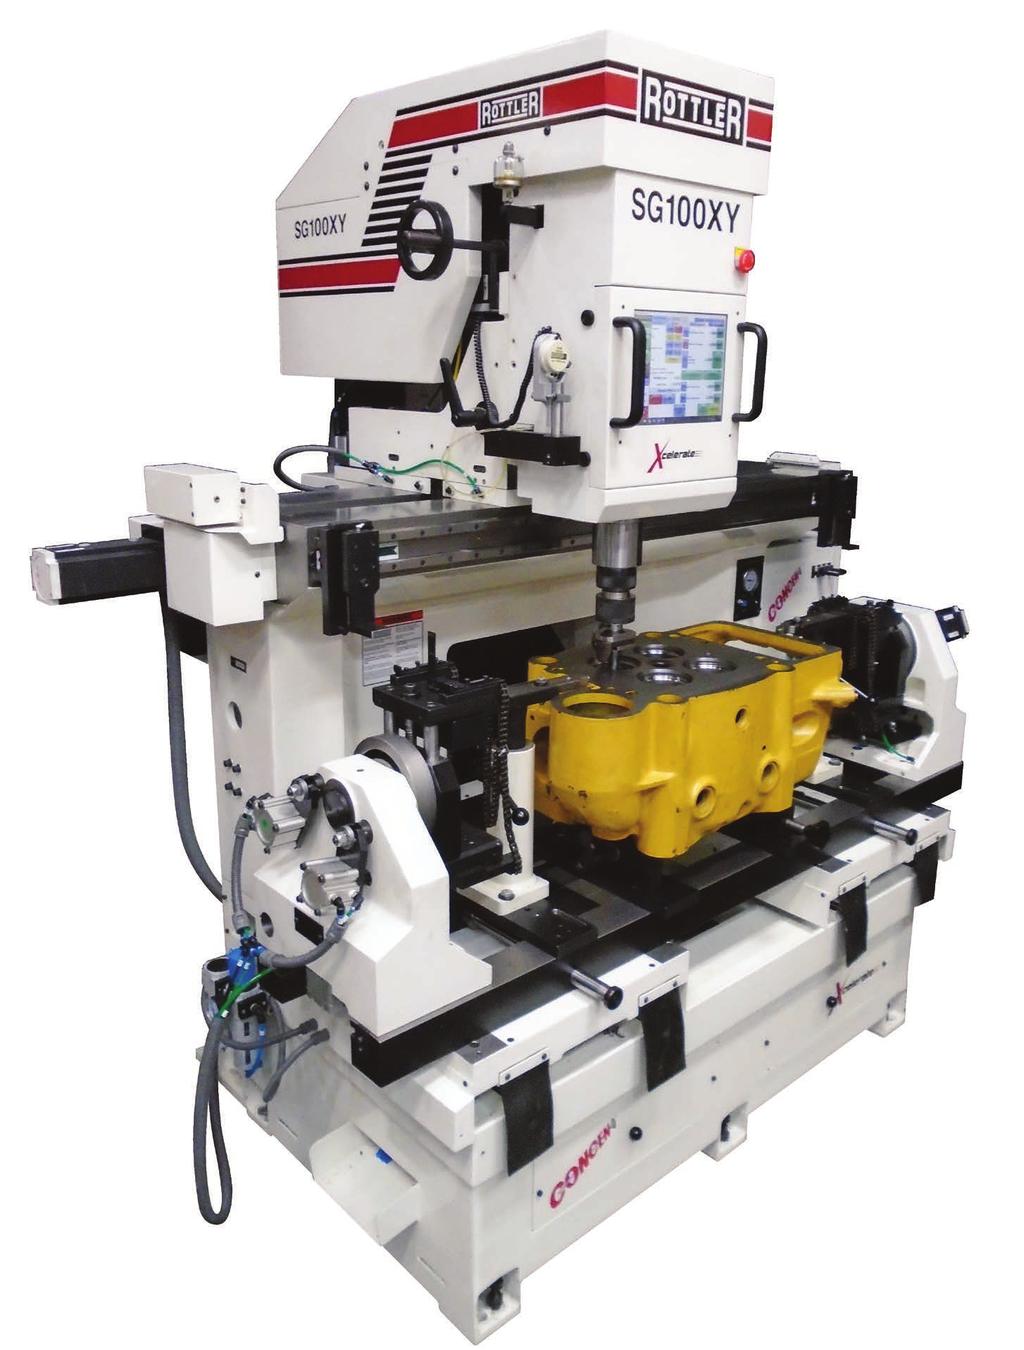 Most seat and guide machines can only handle one single head at a time, requiring the operator to load, clamp, machine intake seats, change tooling, machine exhaust seats and then unload the